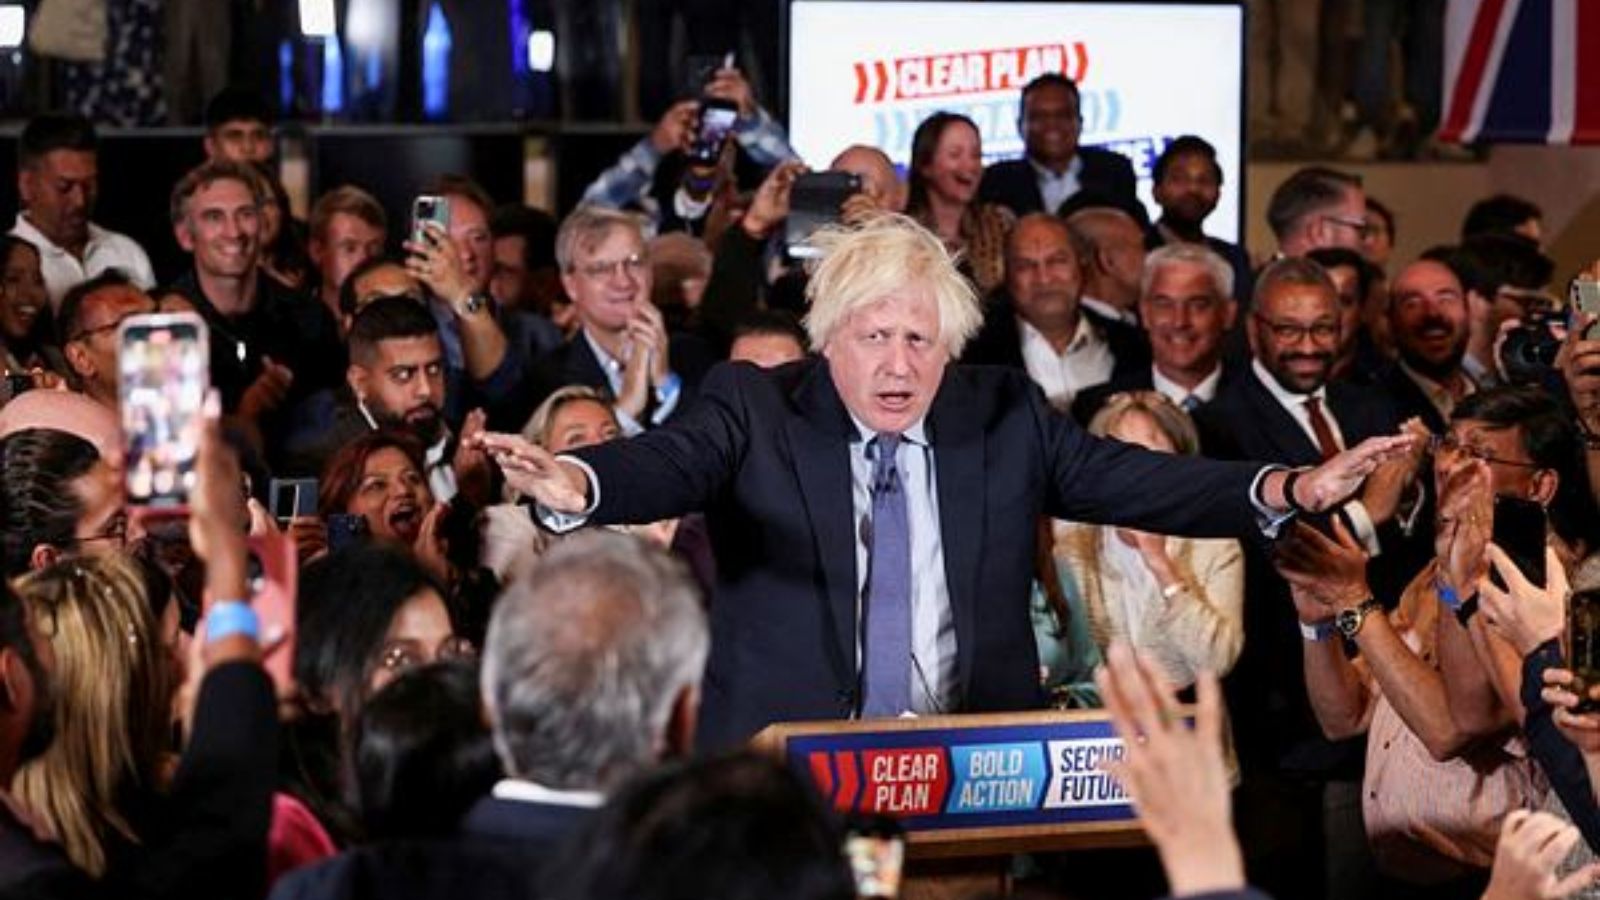 Boris Johnson issues surprise rallying cry for UK election | World News